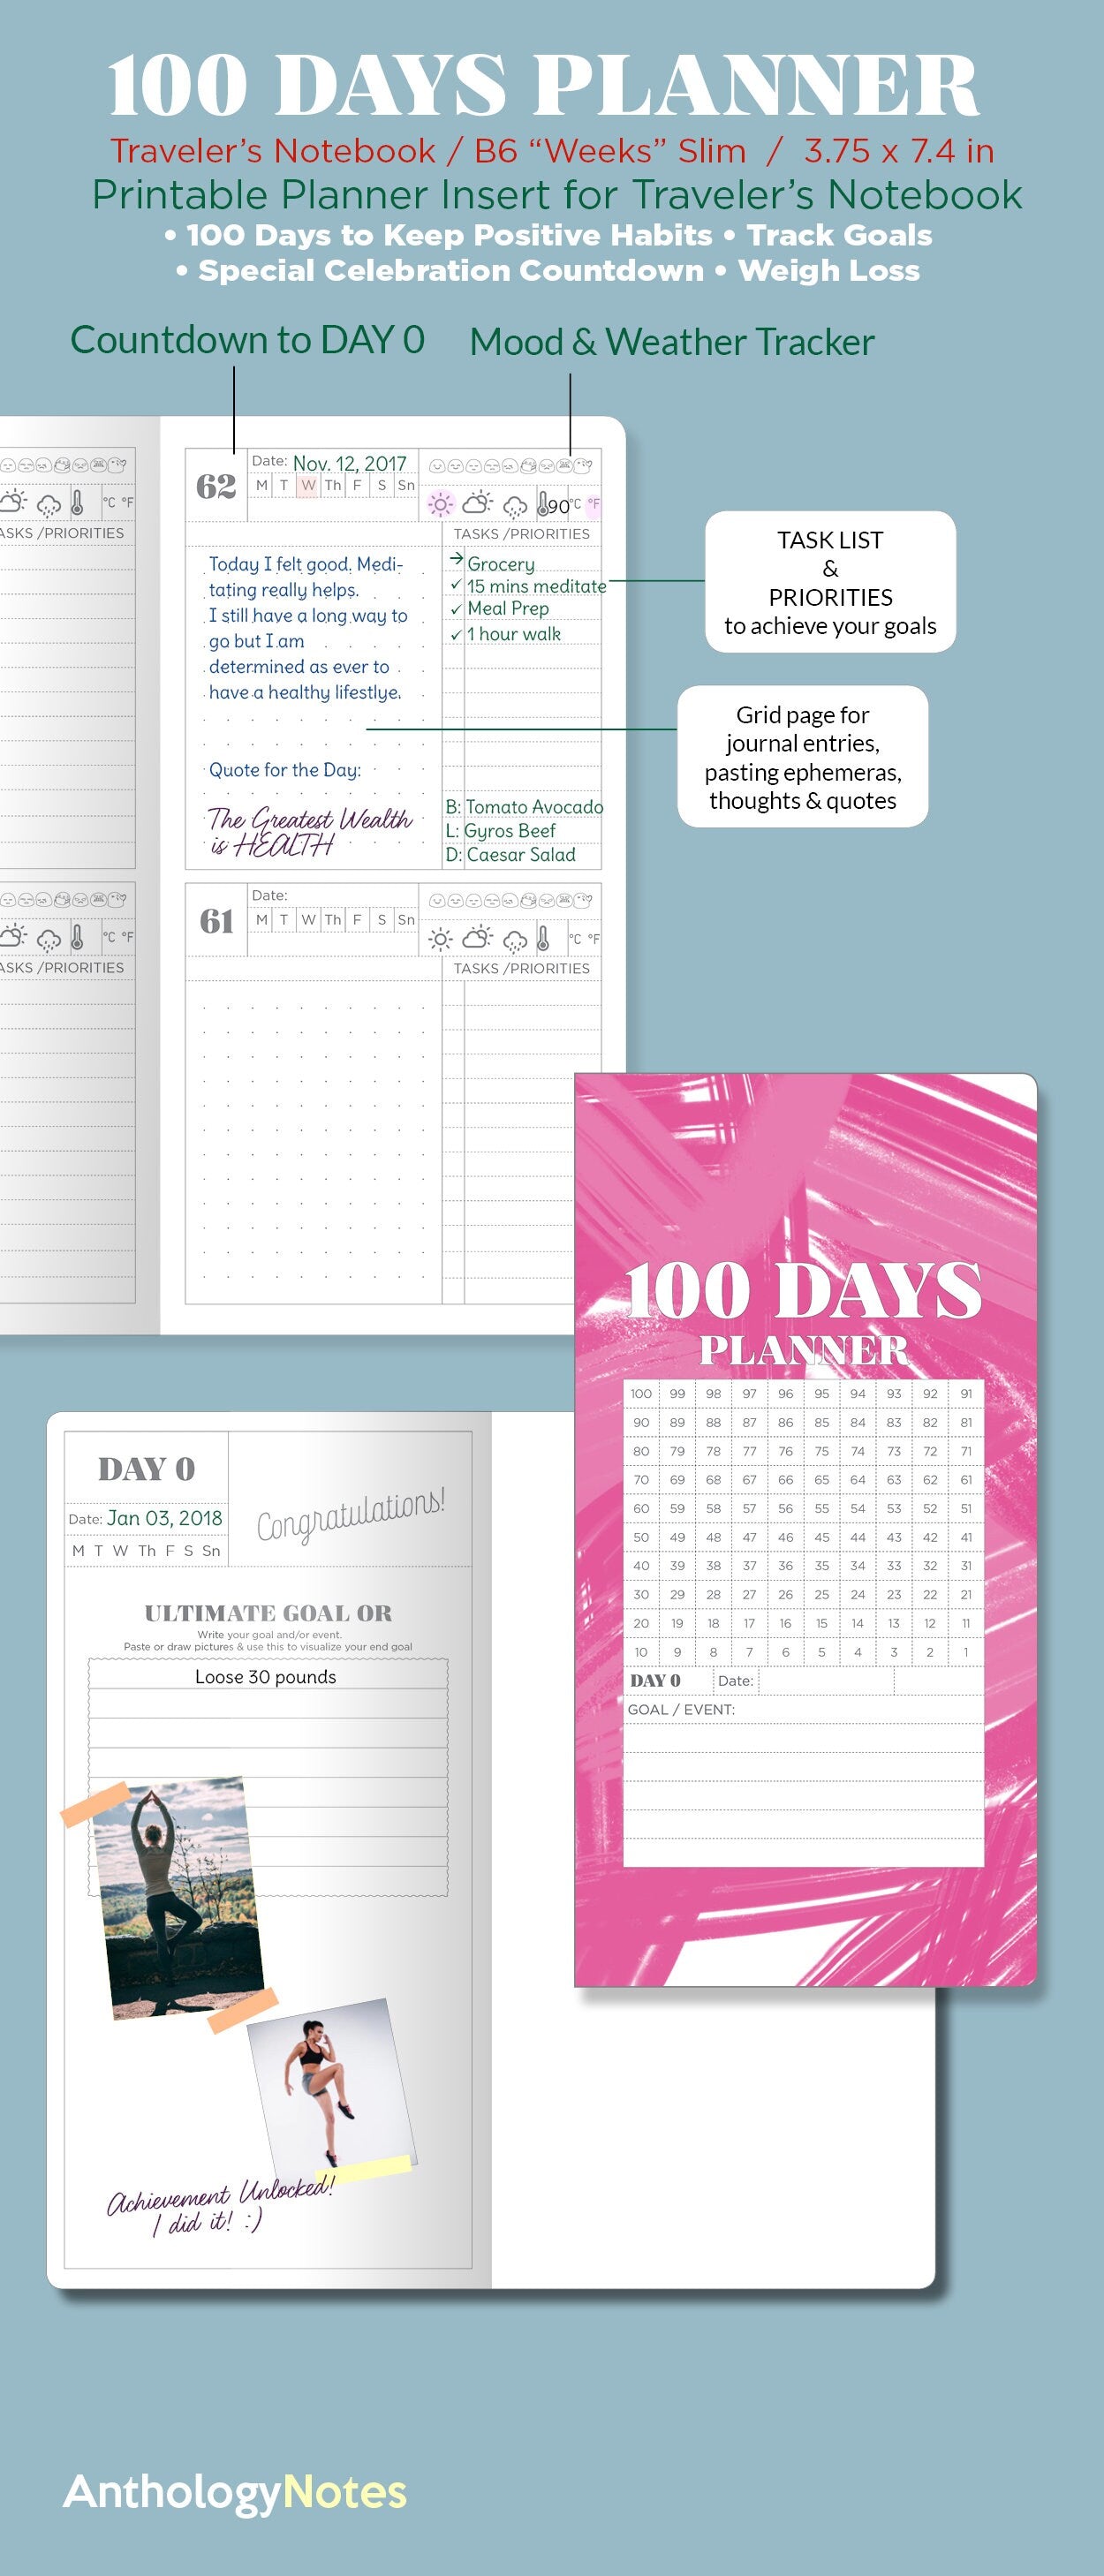 TN WEEKS Slim 100 Days Planner Traveler's Notebook Goal Tracking Count Down Planner Printable Diary Refill